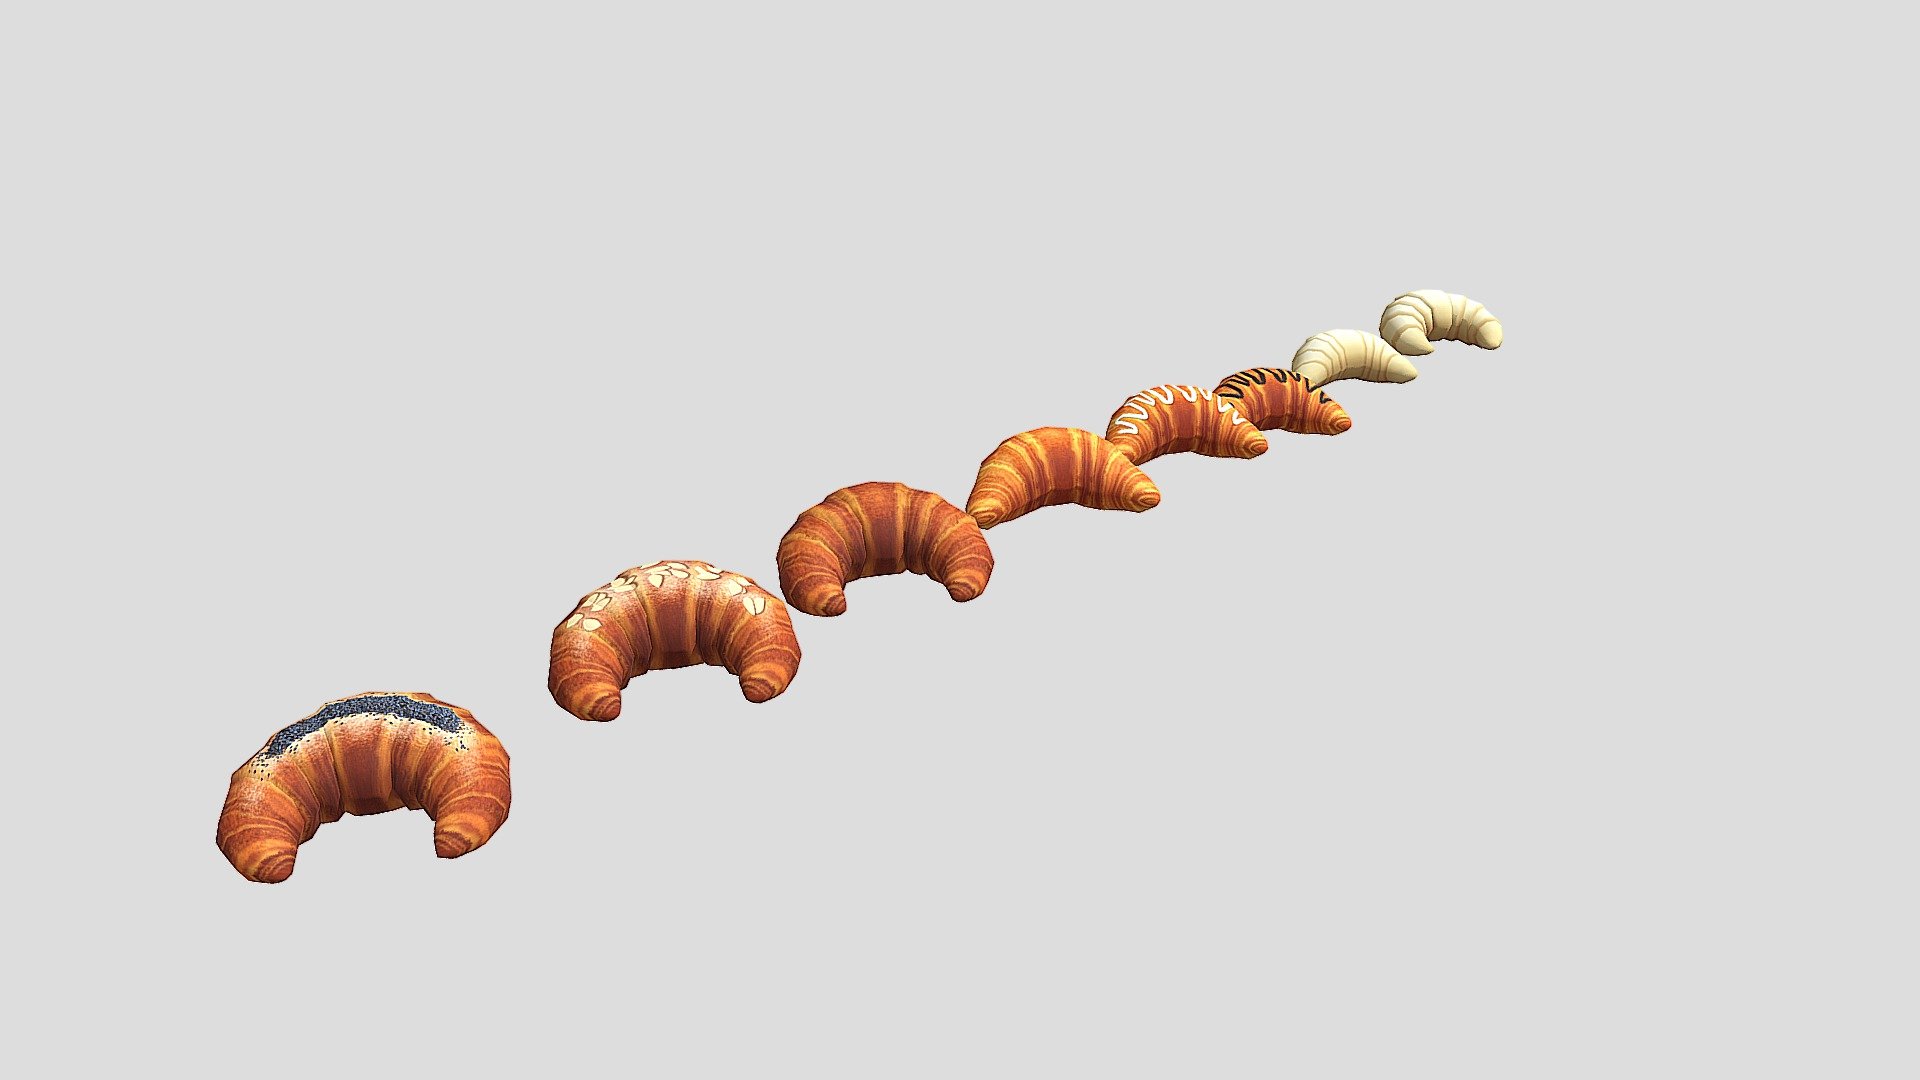 Eight models of appetizing croissants in the style of &ldquo;low-poly